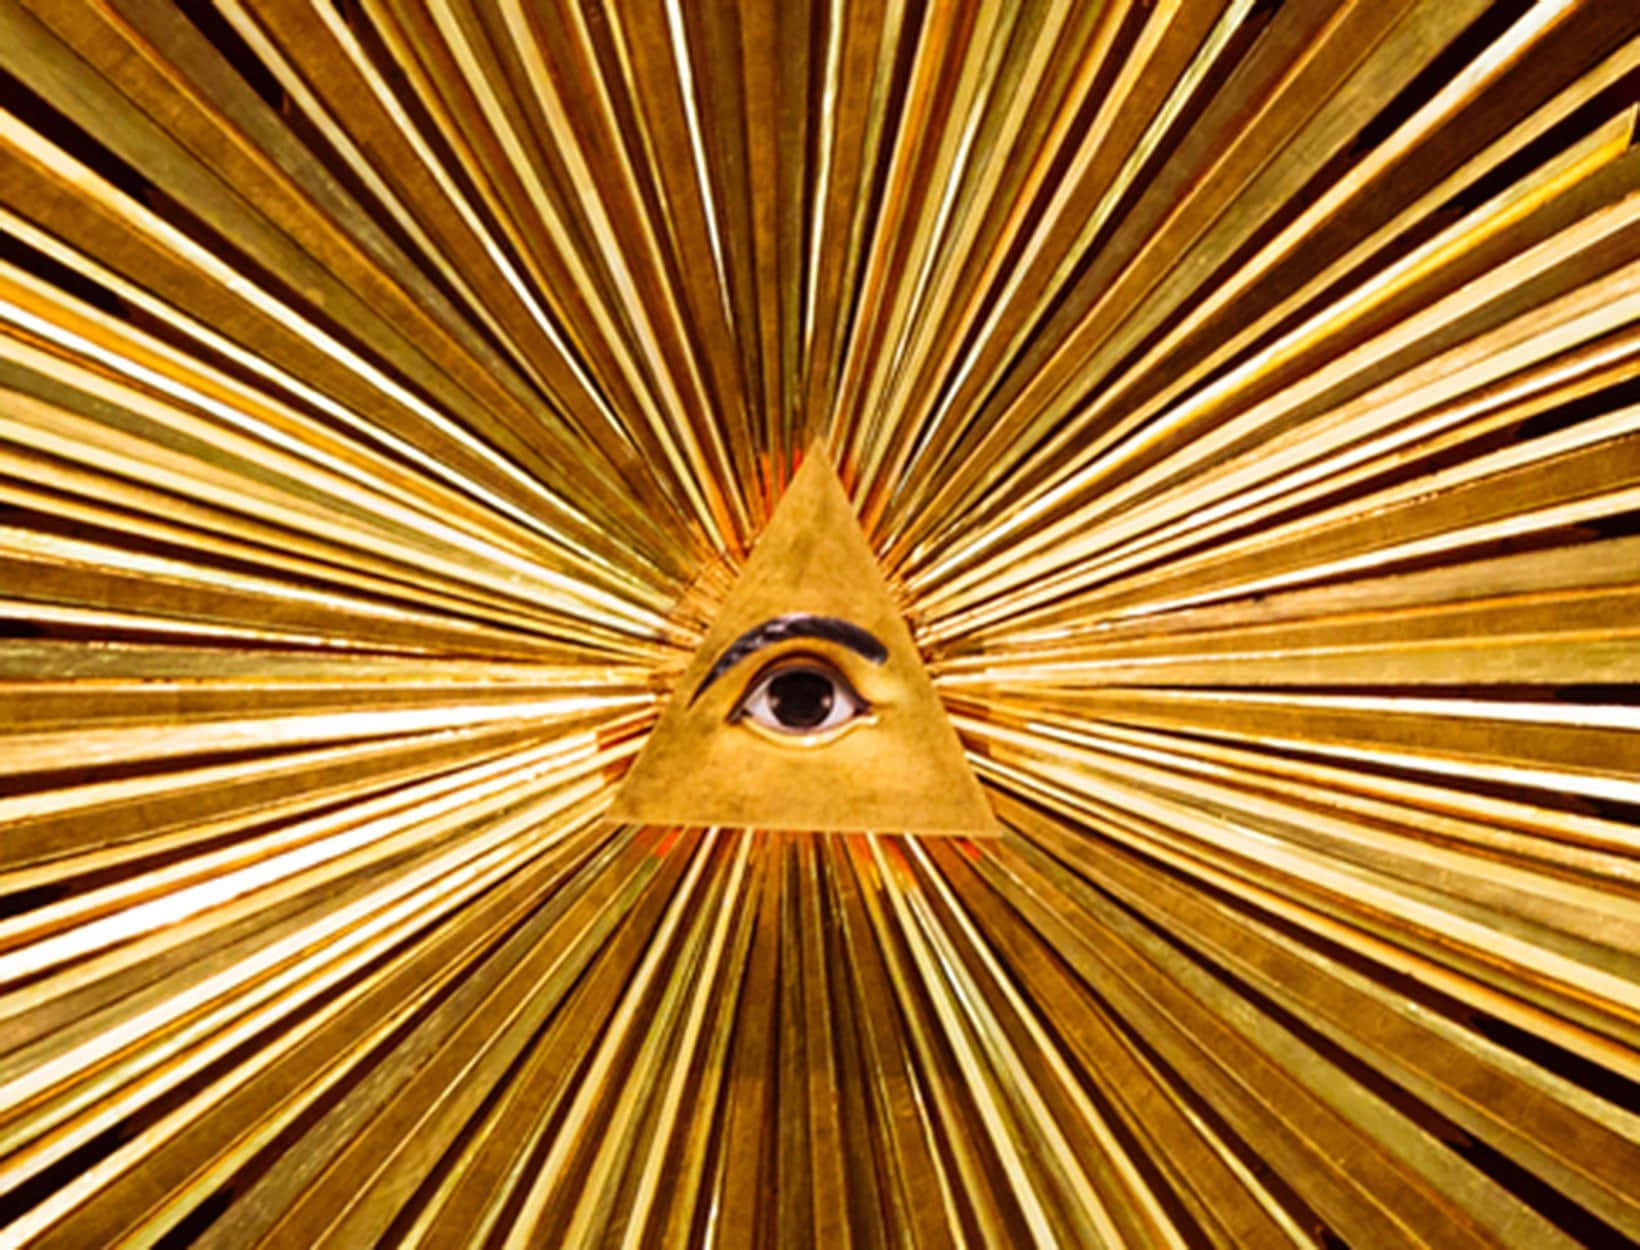 A Golden Eye With Rays Of Light